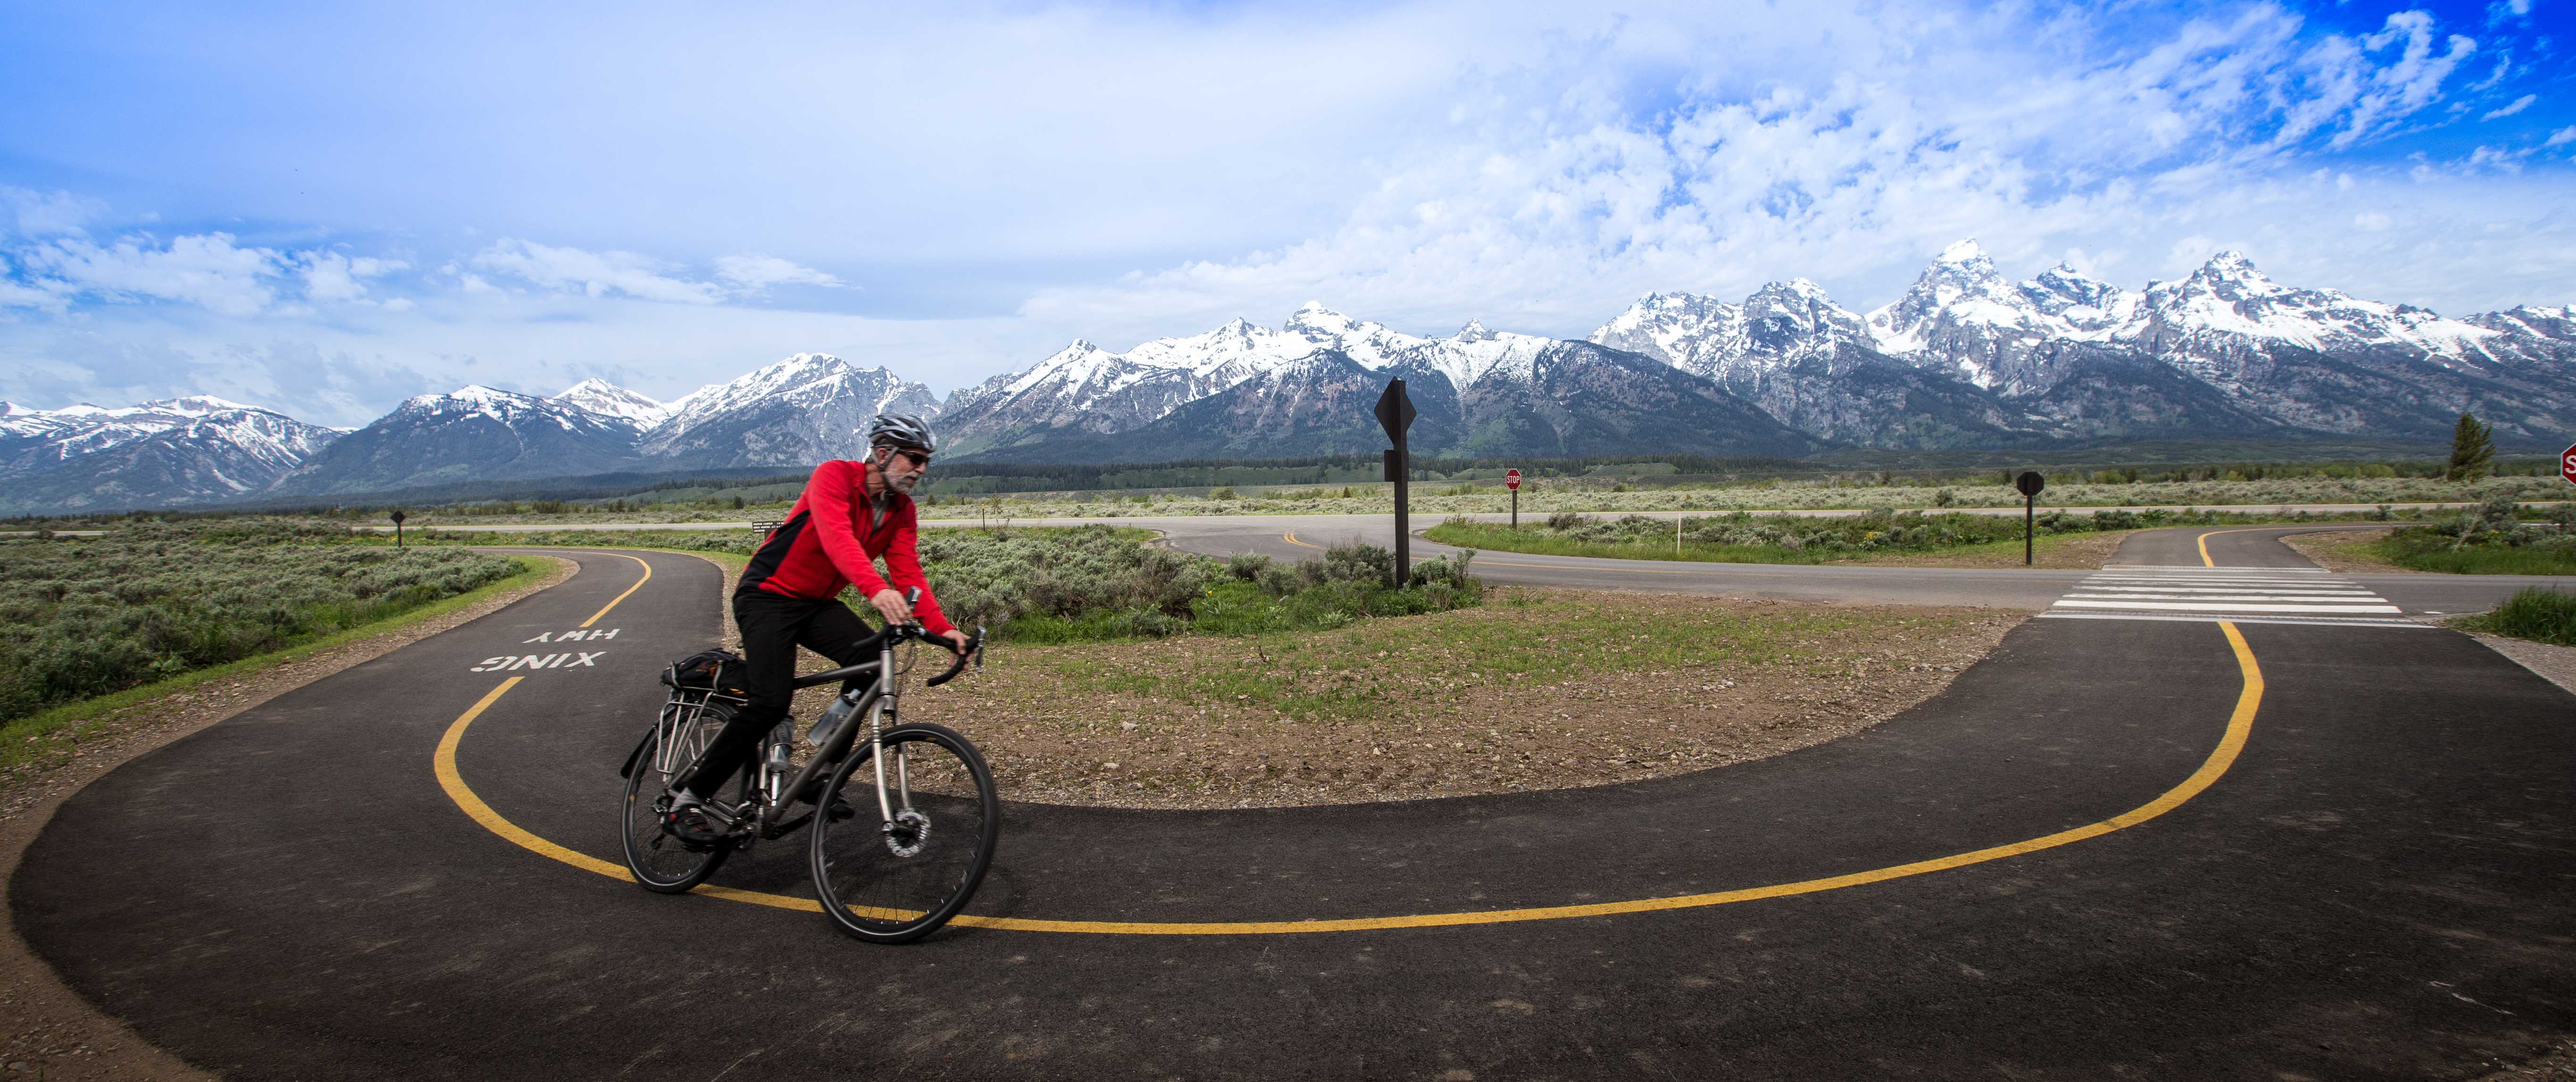 Bicycle rider using the pathway in Grand Teton